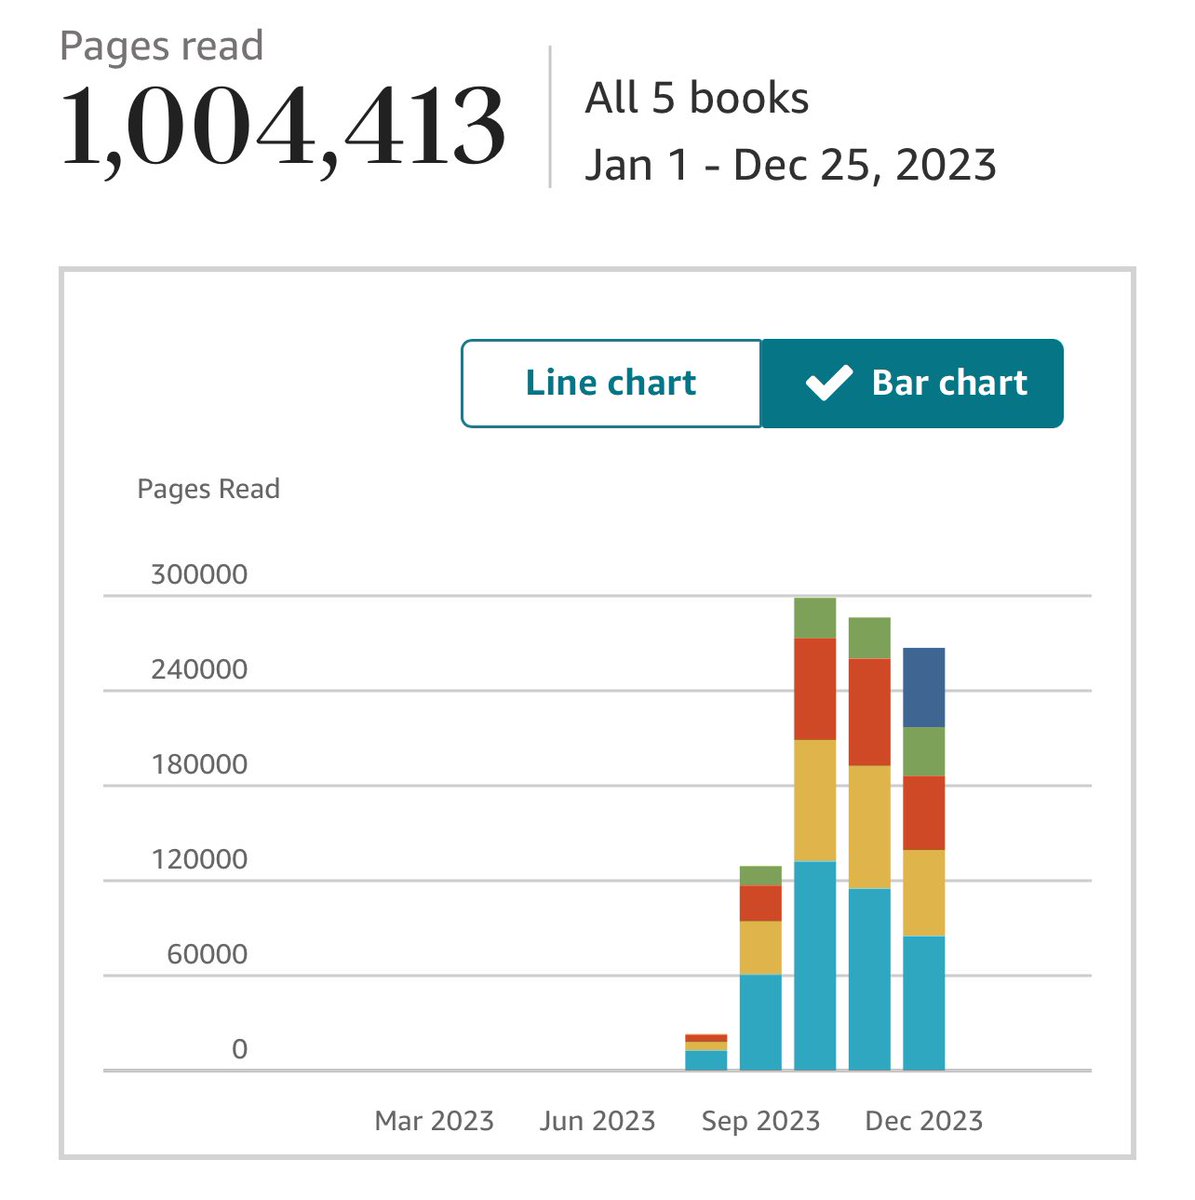 Best Christmas gift ever… I hit over 1 million page reads on KU today… not bad given I only relaunched my first two books in August, launched my third book and just launched my 4th book a couple of weeks ago. Merry Christmas all and thanks to all my readers!!! Here’s to 2024!